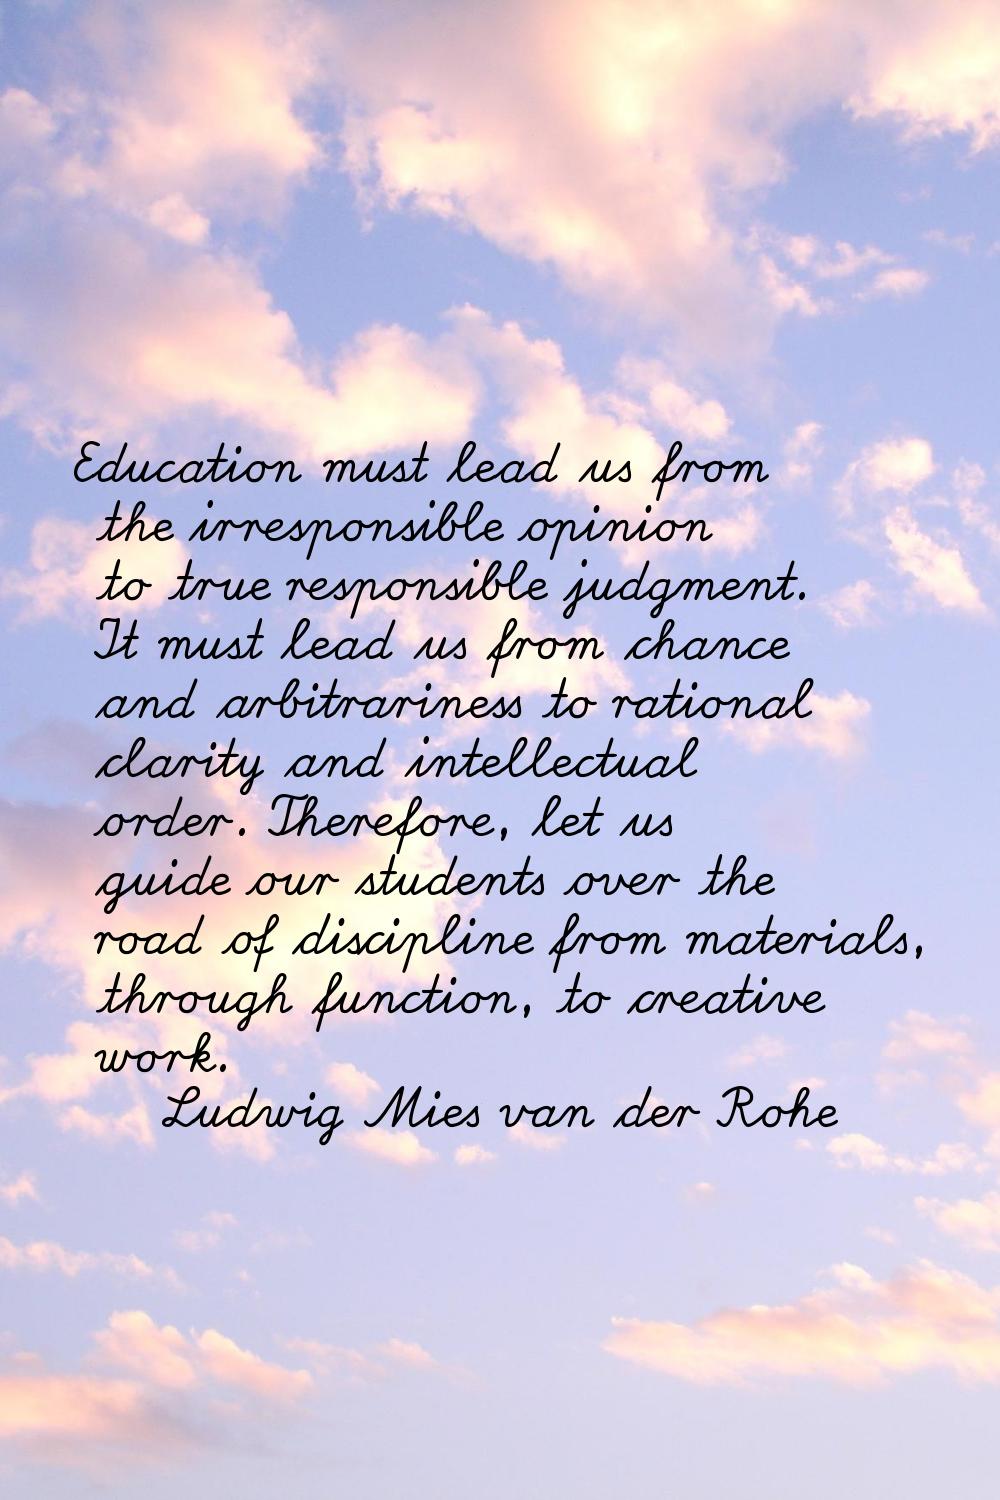 Education must lead us from the irresponsible opinion to true responsible judgment. It must lead us